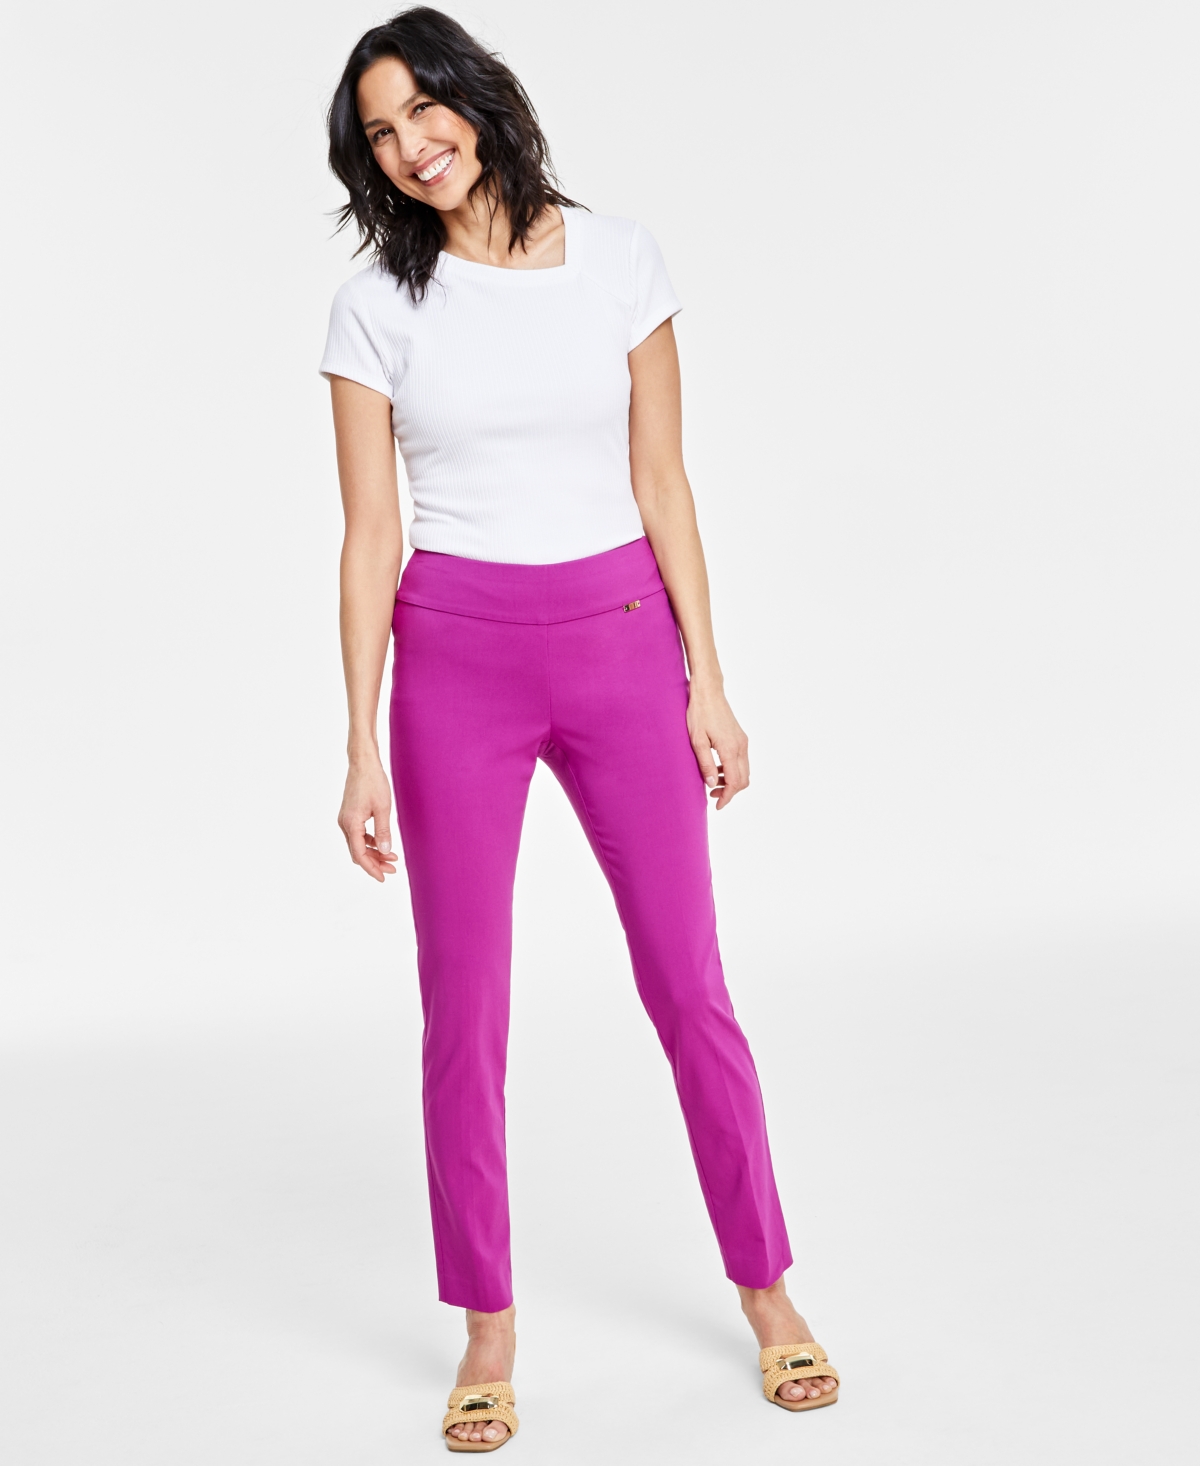 Mid-Rise Petite Tummy-Control Skinny Pants, Petite & Petite Short, Created for Macy's - Butterfly Blue